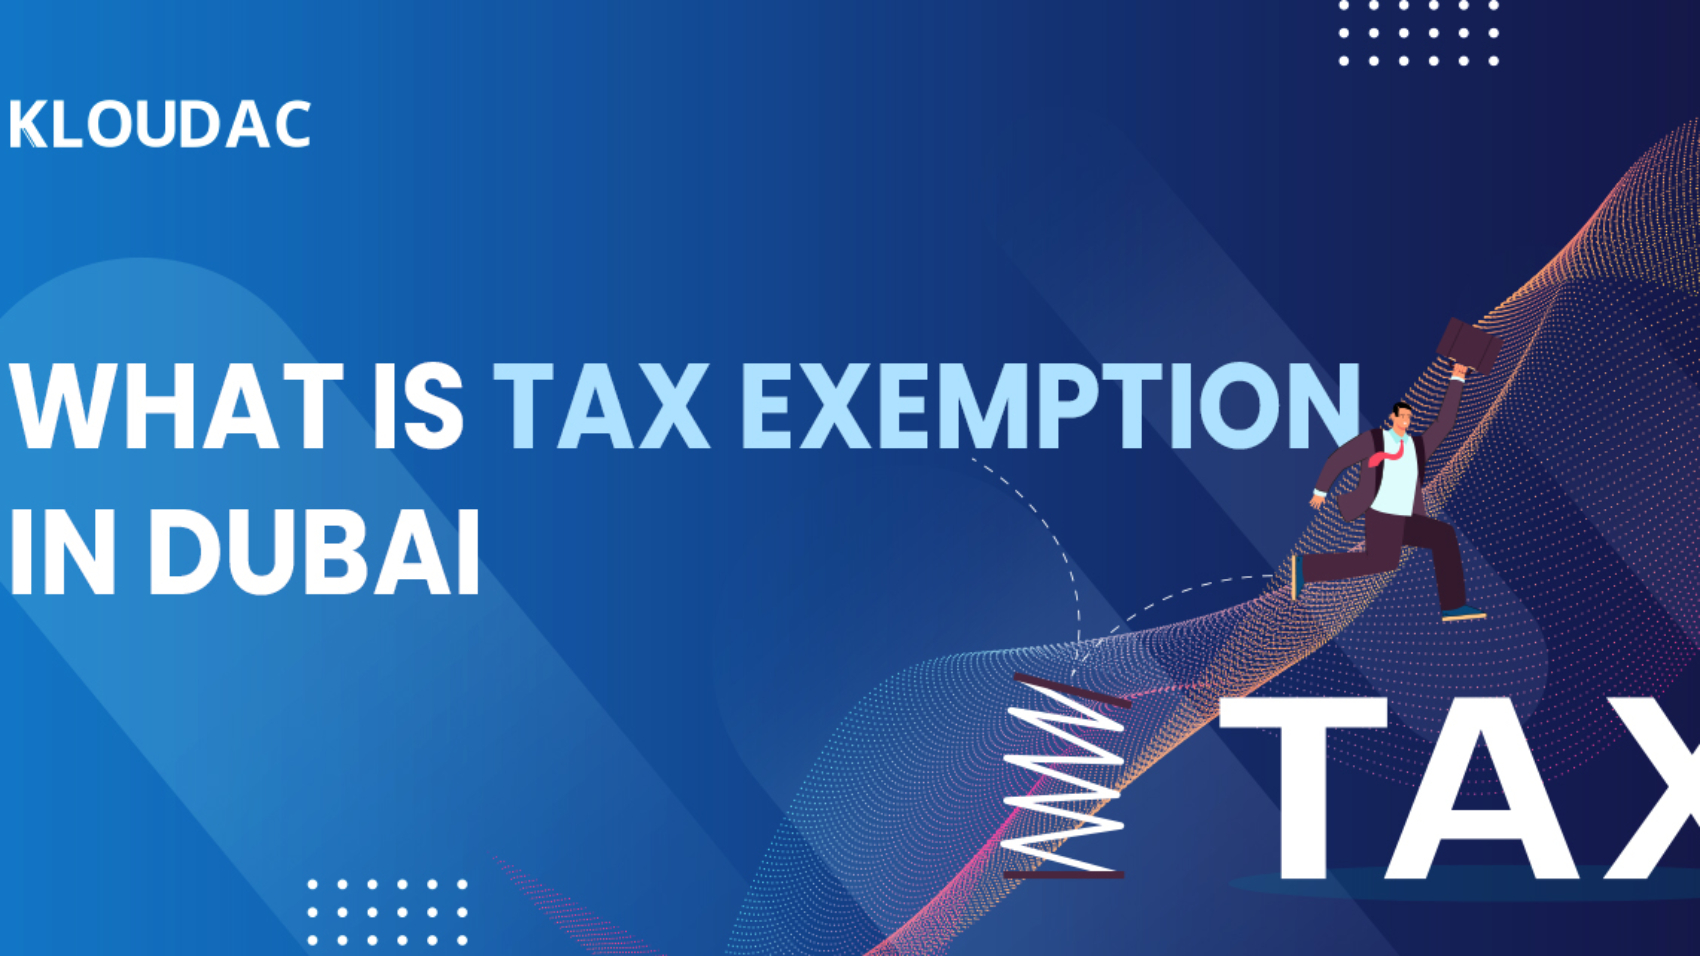 What is tax exemption in Dubai